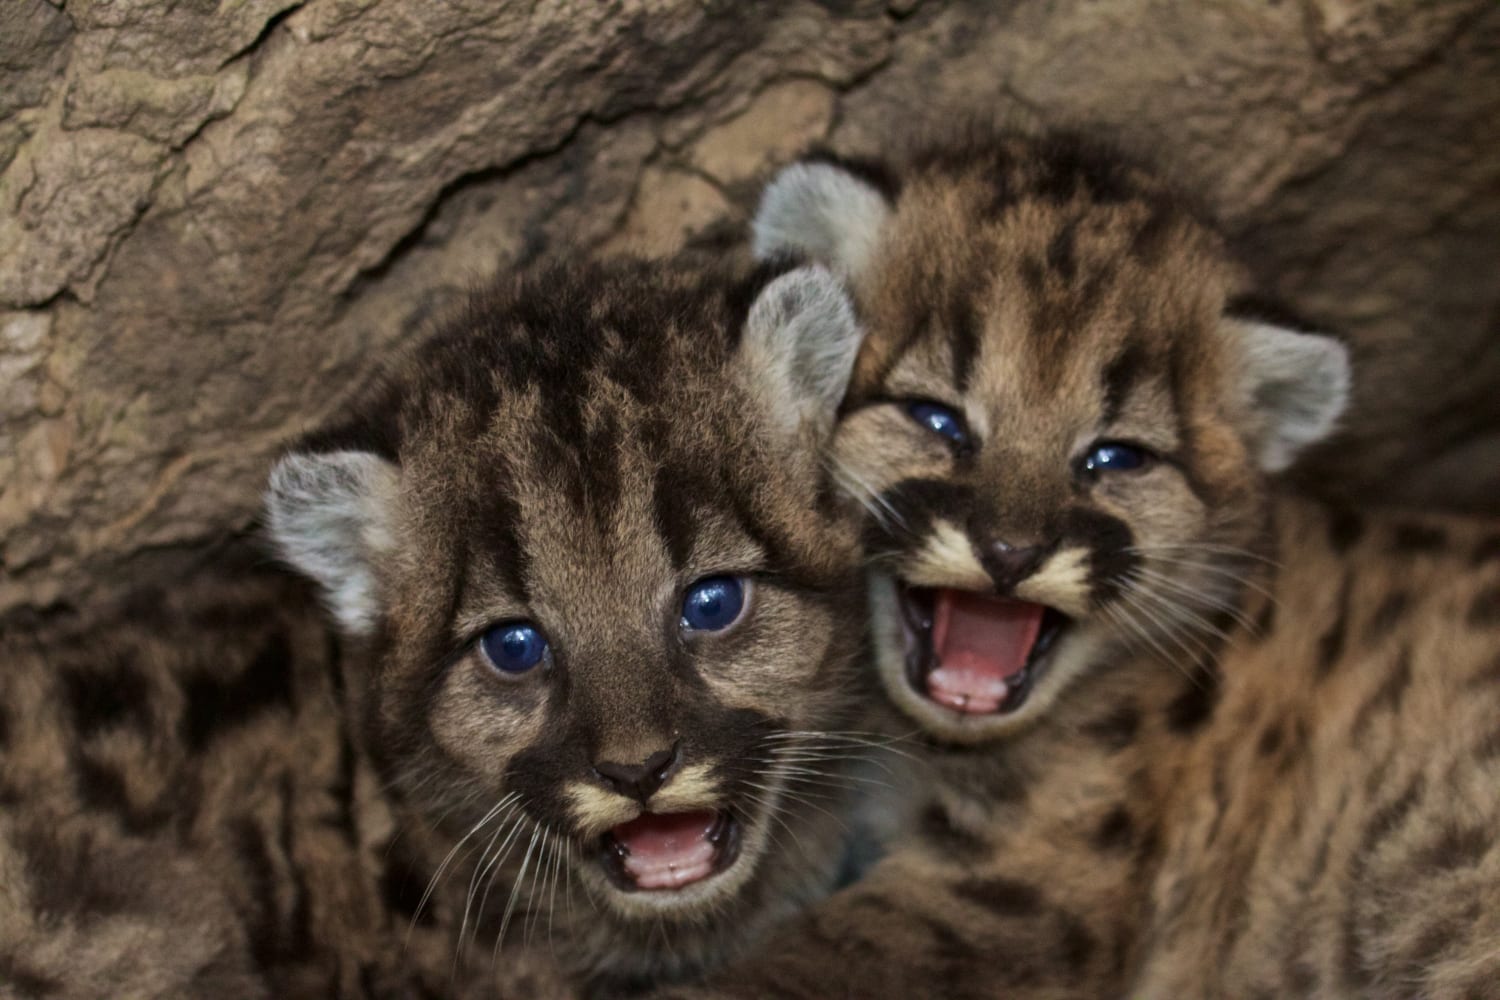 Mountain lions in the Santa Monica and Santa Ana Mountains in southern California are being born in areas fragmented by freeways and single family housing developments. The inbred individuals often grow up with deformities like a kink in their tail.